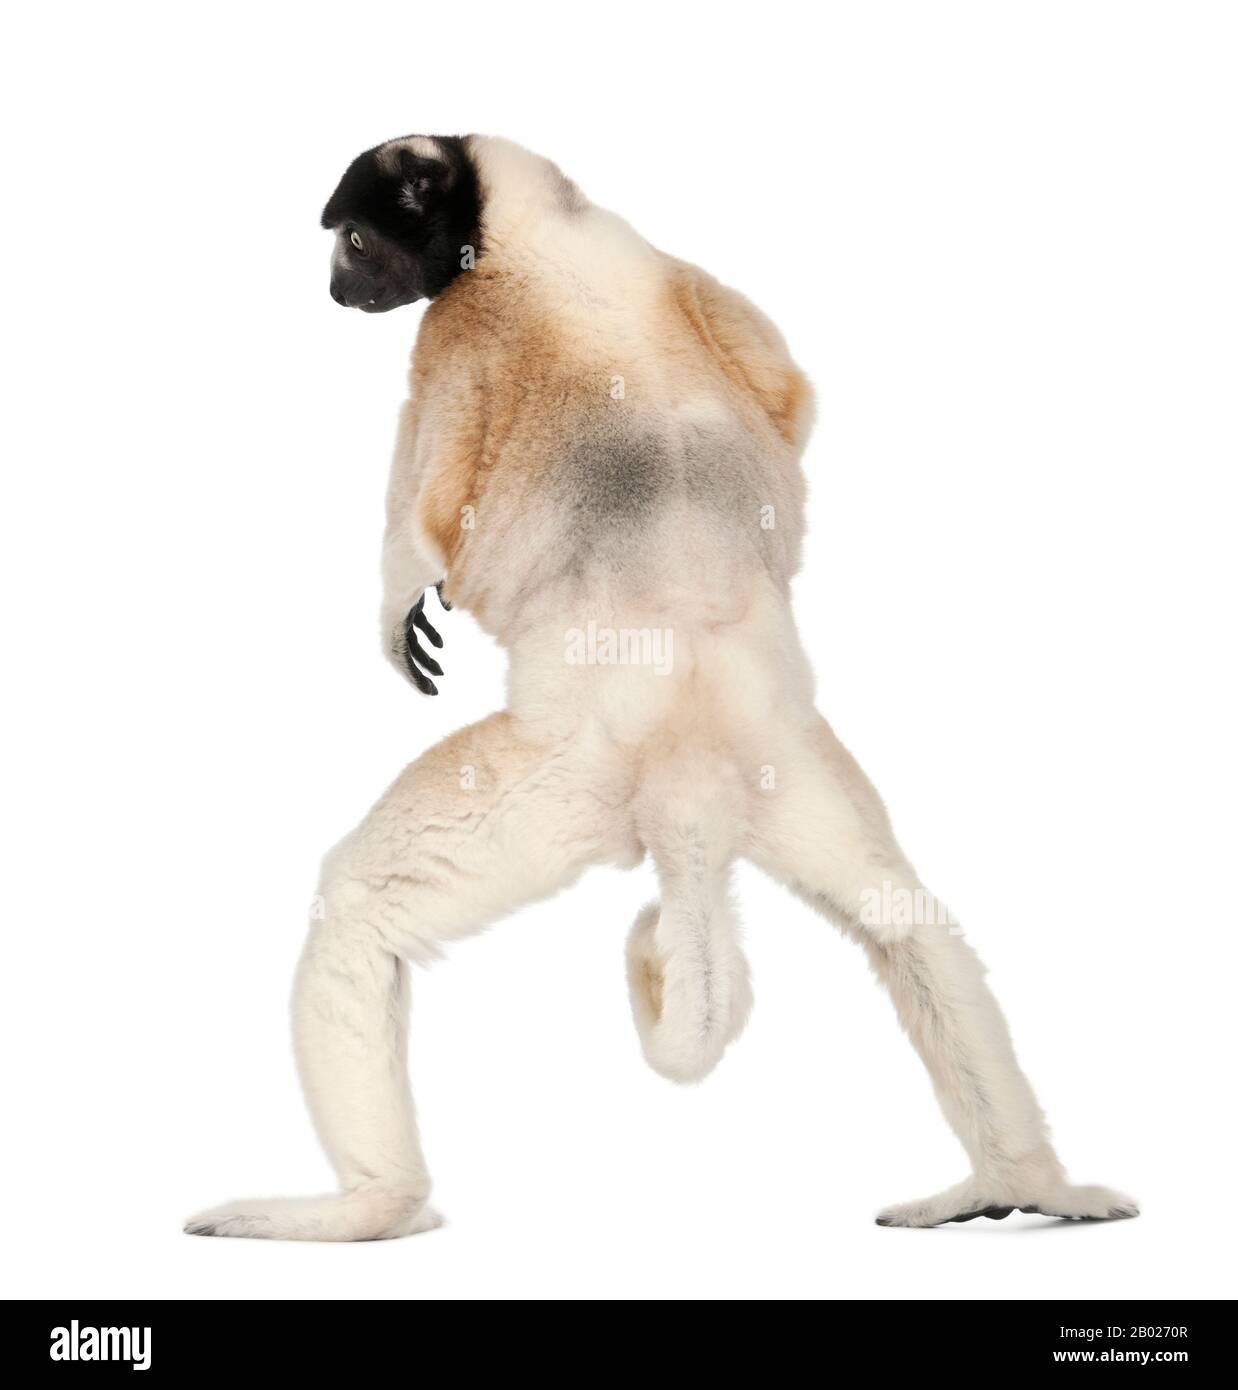 Crowned Sifaka, Propithecus coronatus, 14 years old, walking in front of white background Stock Photo